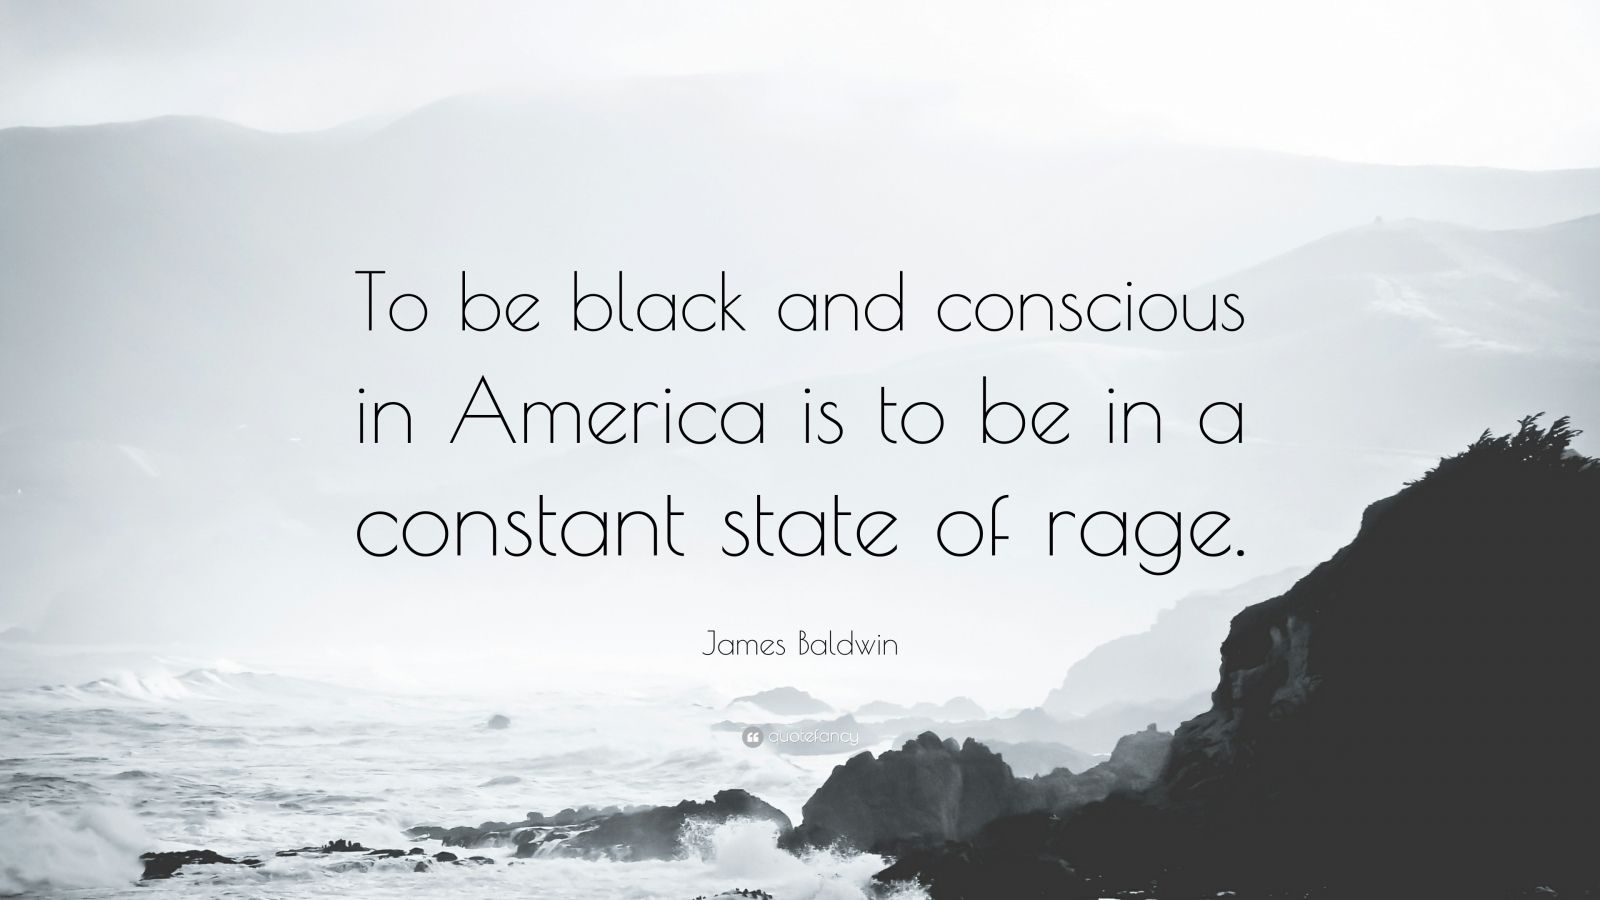 James Baldwin Quote: “To be black and conscious in America is to be in